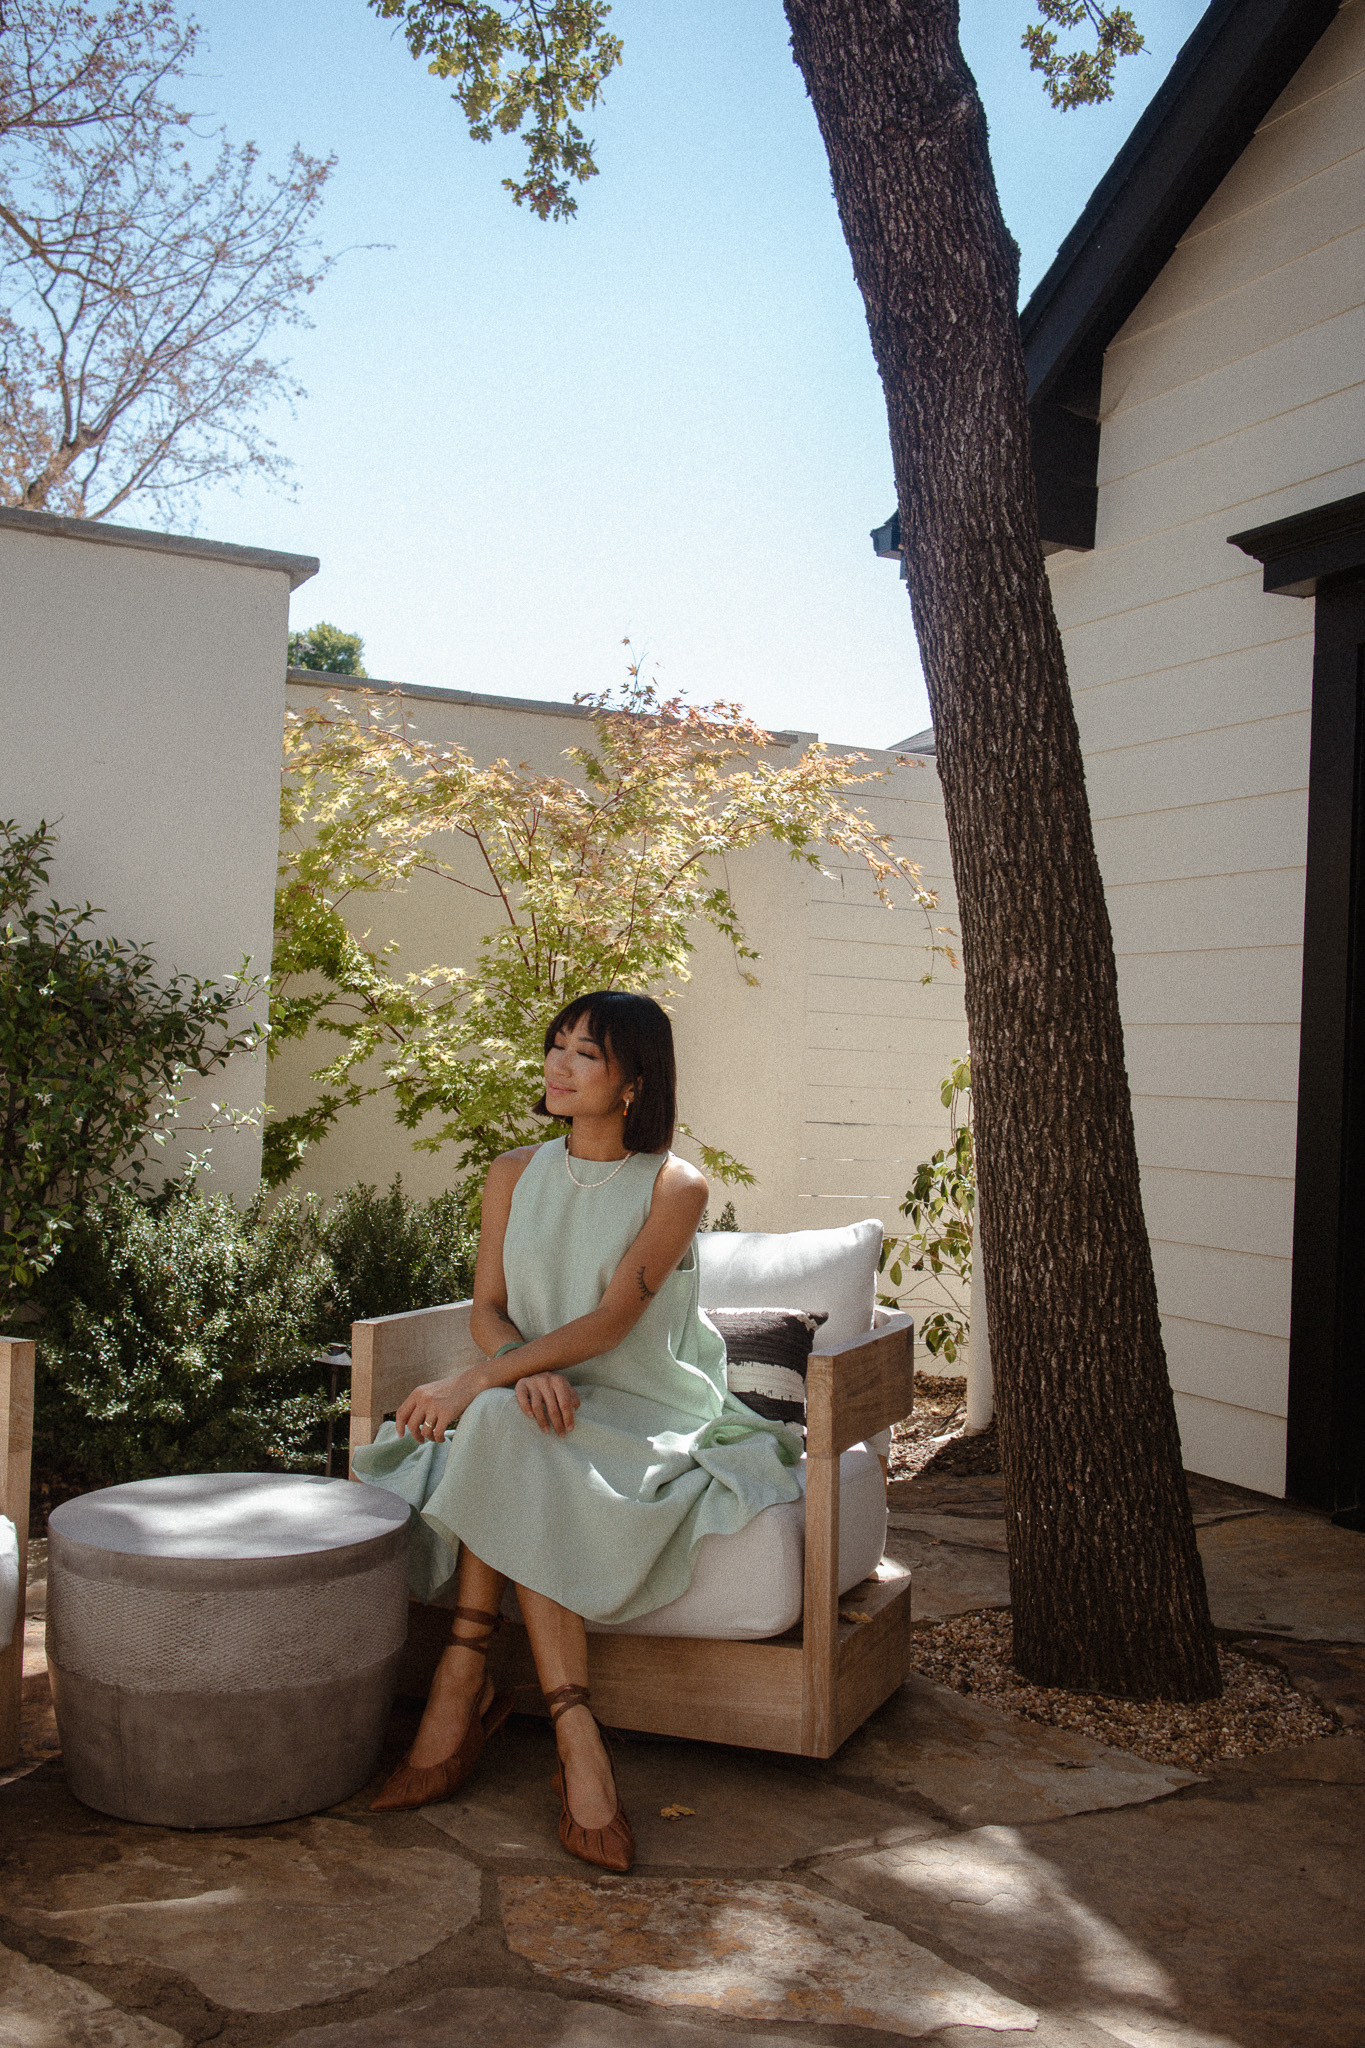 San Francisco based influencer Danica Janae explains a thoughtful review on her recent staycation at the MacArthur Place in Sonoma, California